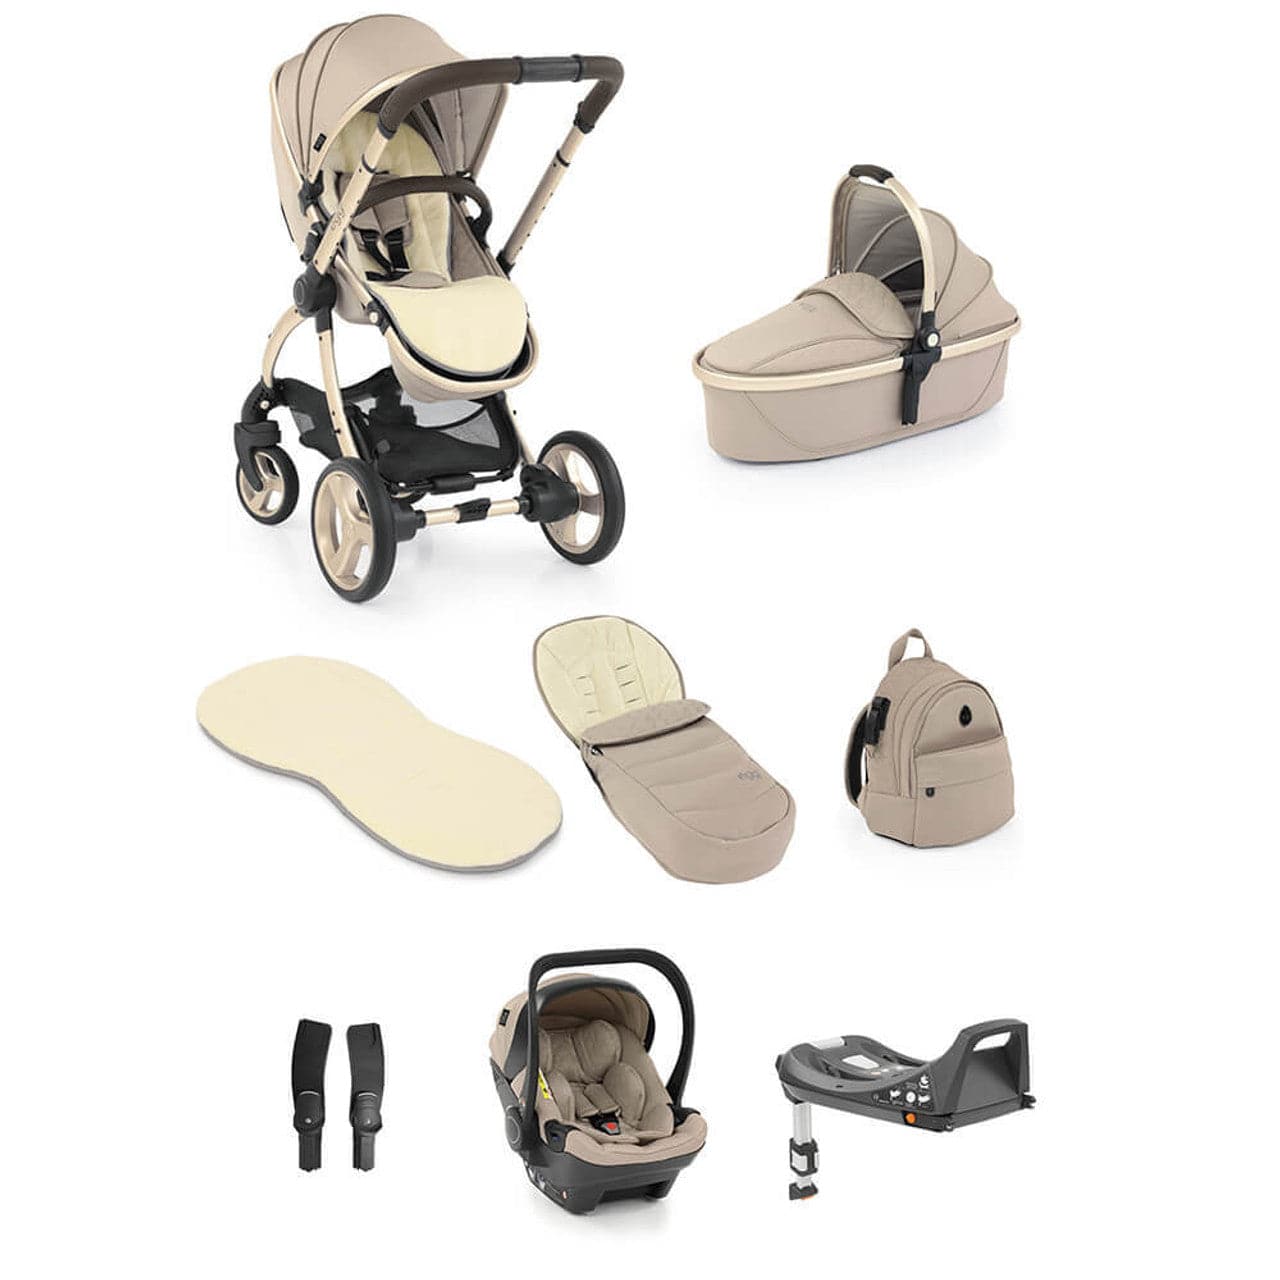 Egg® 2 Luxury Shell i-Size Travel System Bundle - Feather - For Your Little One